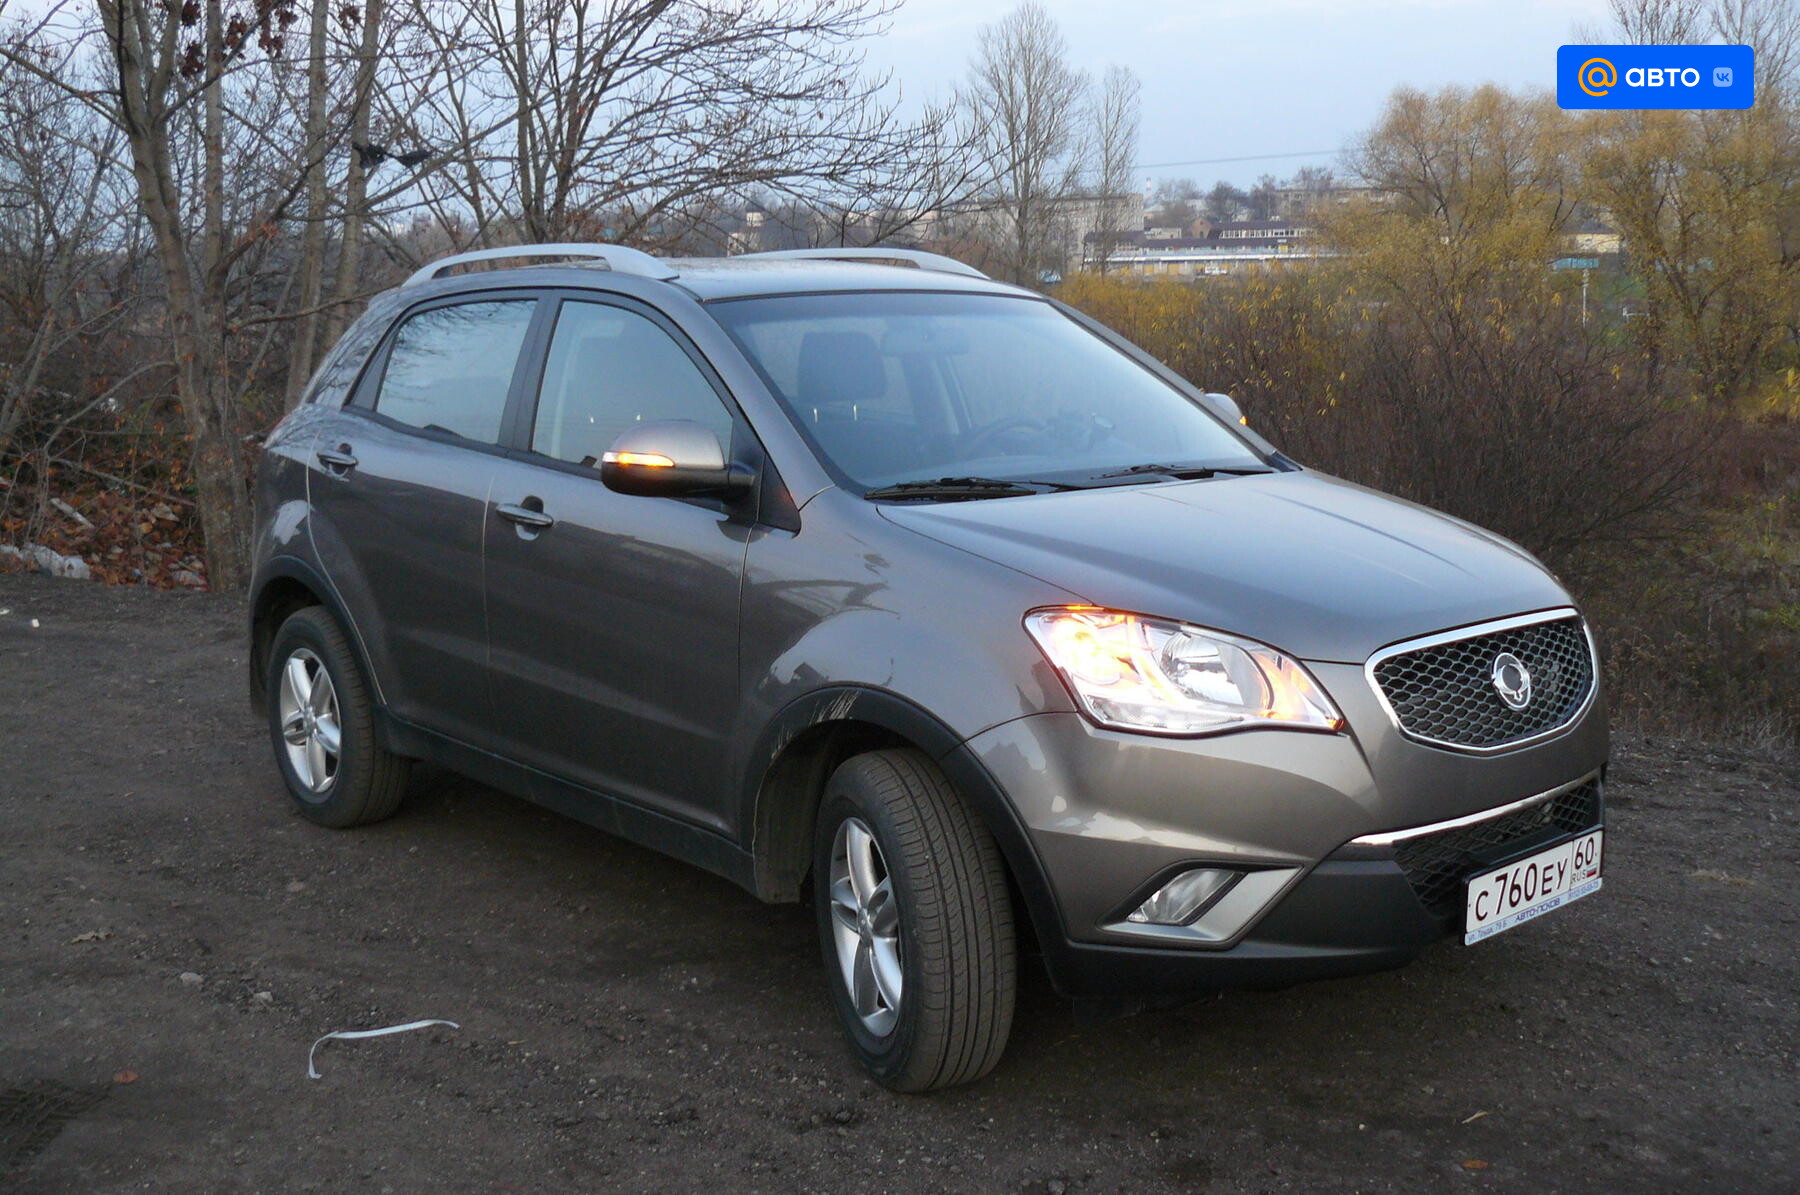 Actyon new 2011. SSANGYONG Actyon 2011. SSANGYONG Actyon 2011 дизель. SSANGYONG Actyon II. SSANGYONG Actyon 2013.